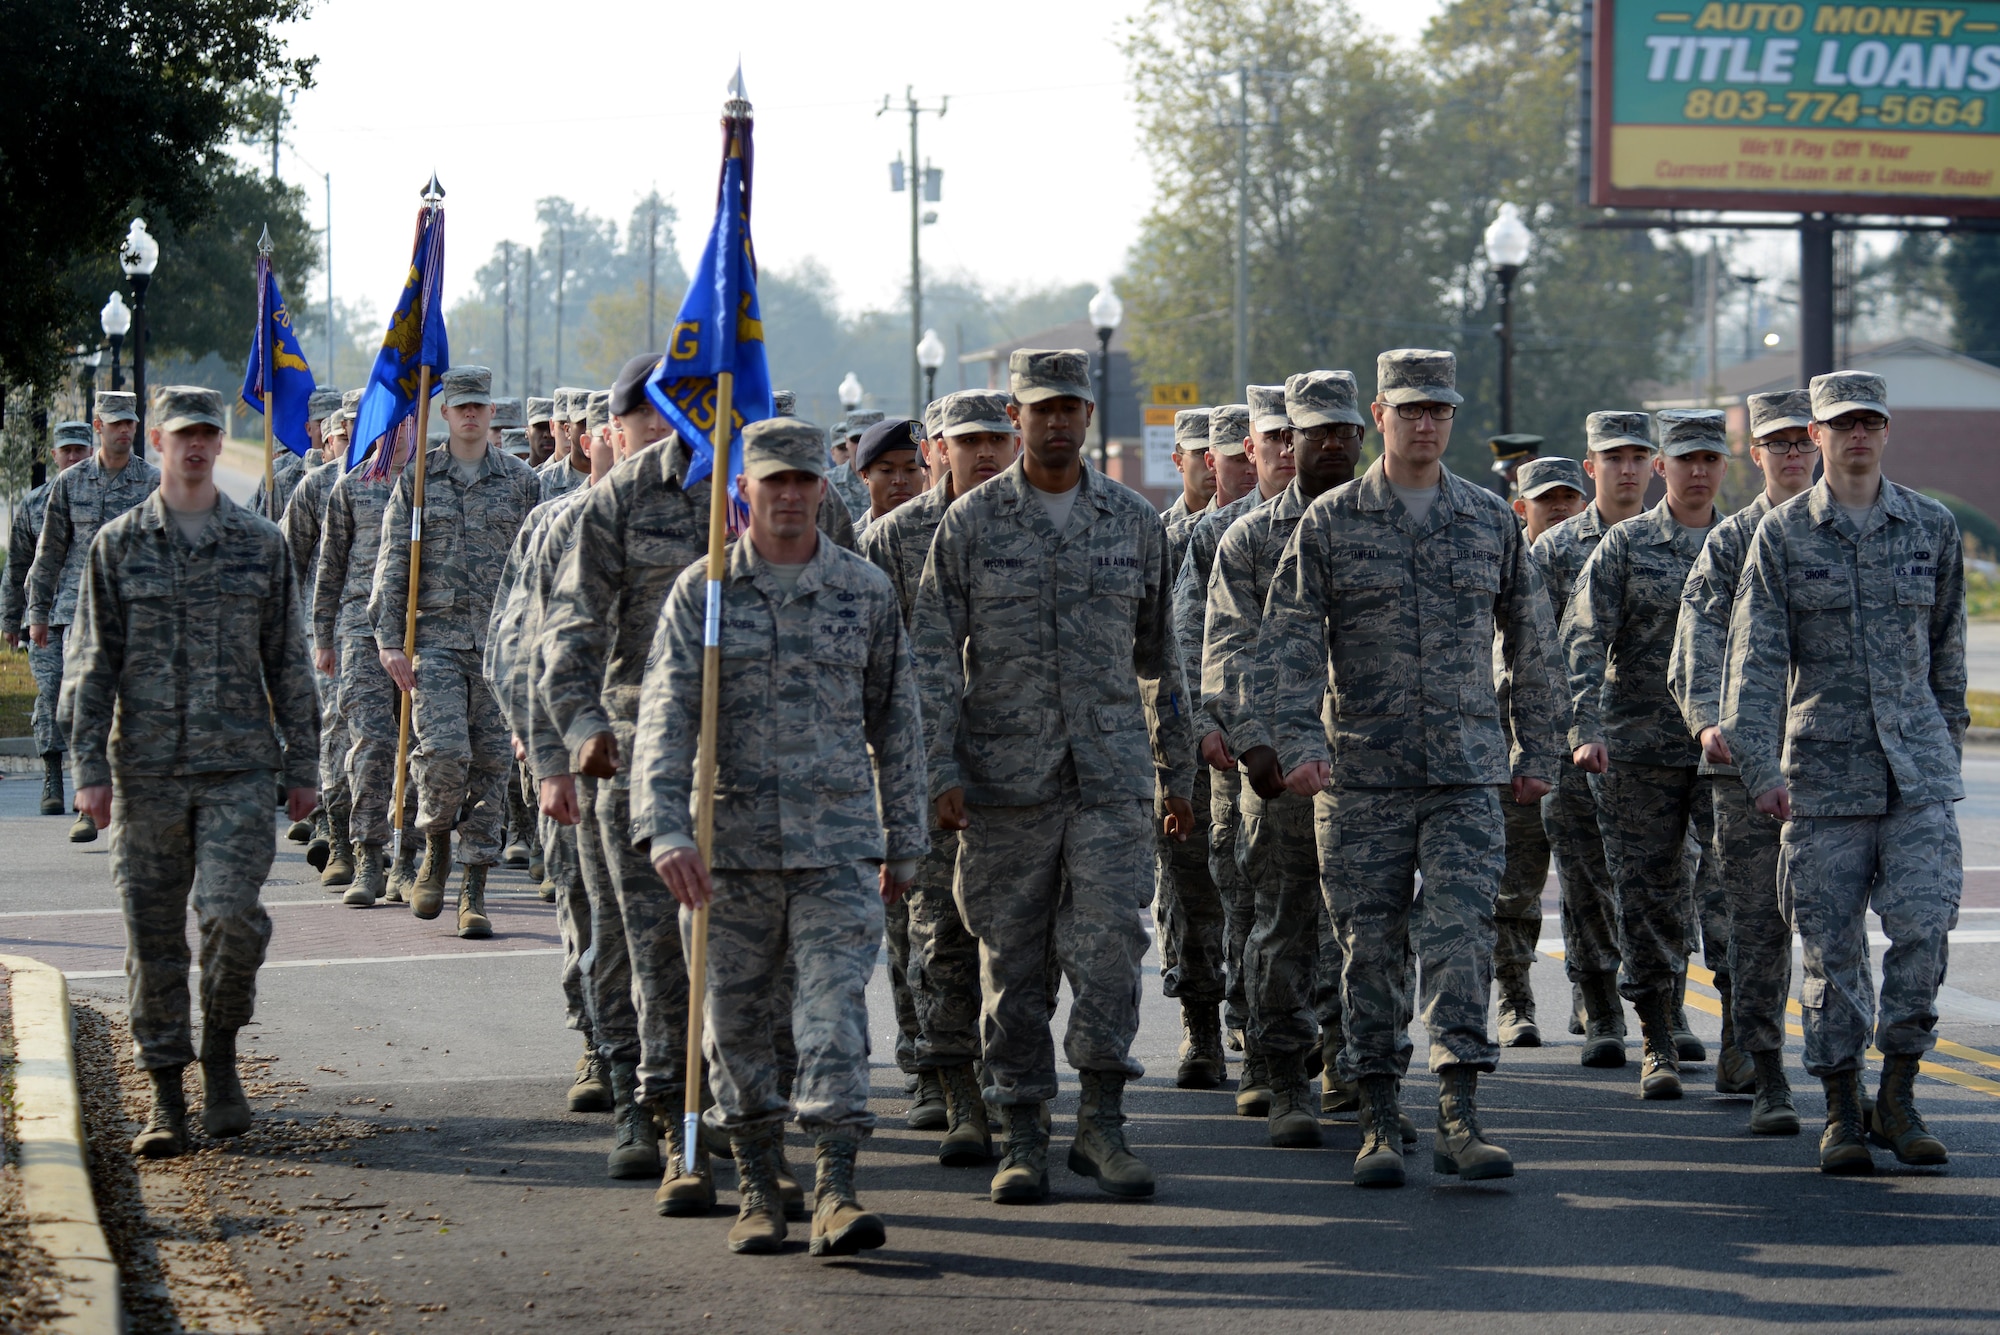 U.S. Airmen assigned to the 20th Fighter Wing march in formation during a Veterans Day parade, Sumter, S.C., Nov. 11, 2016. This year’s parade was the second held in Sumter since 1987. (U.S. Air Force photo by Airman 1st Class Kelsey Tucker)